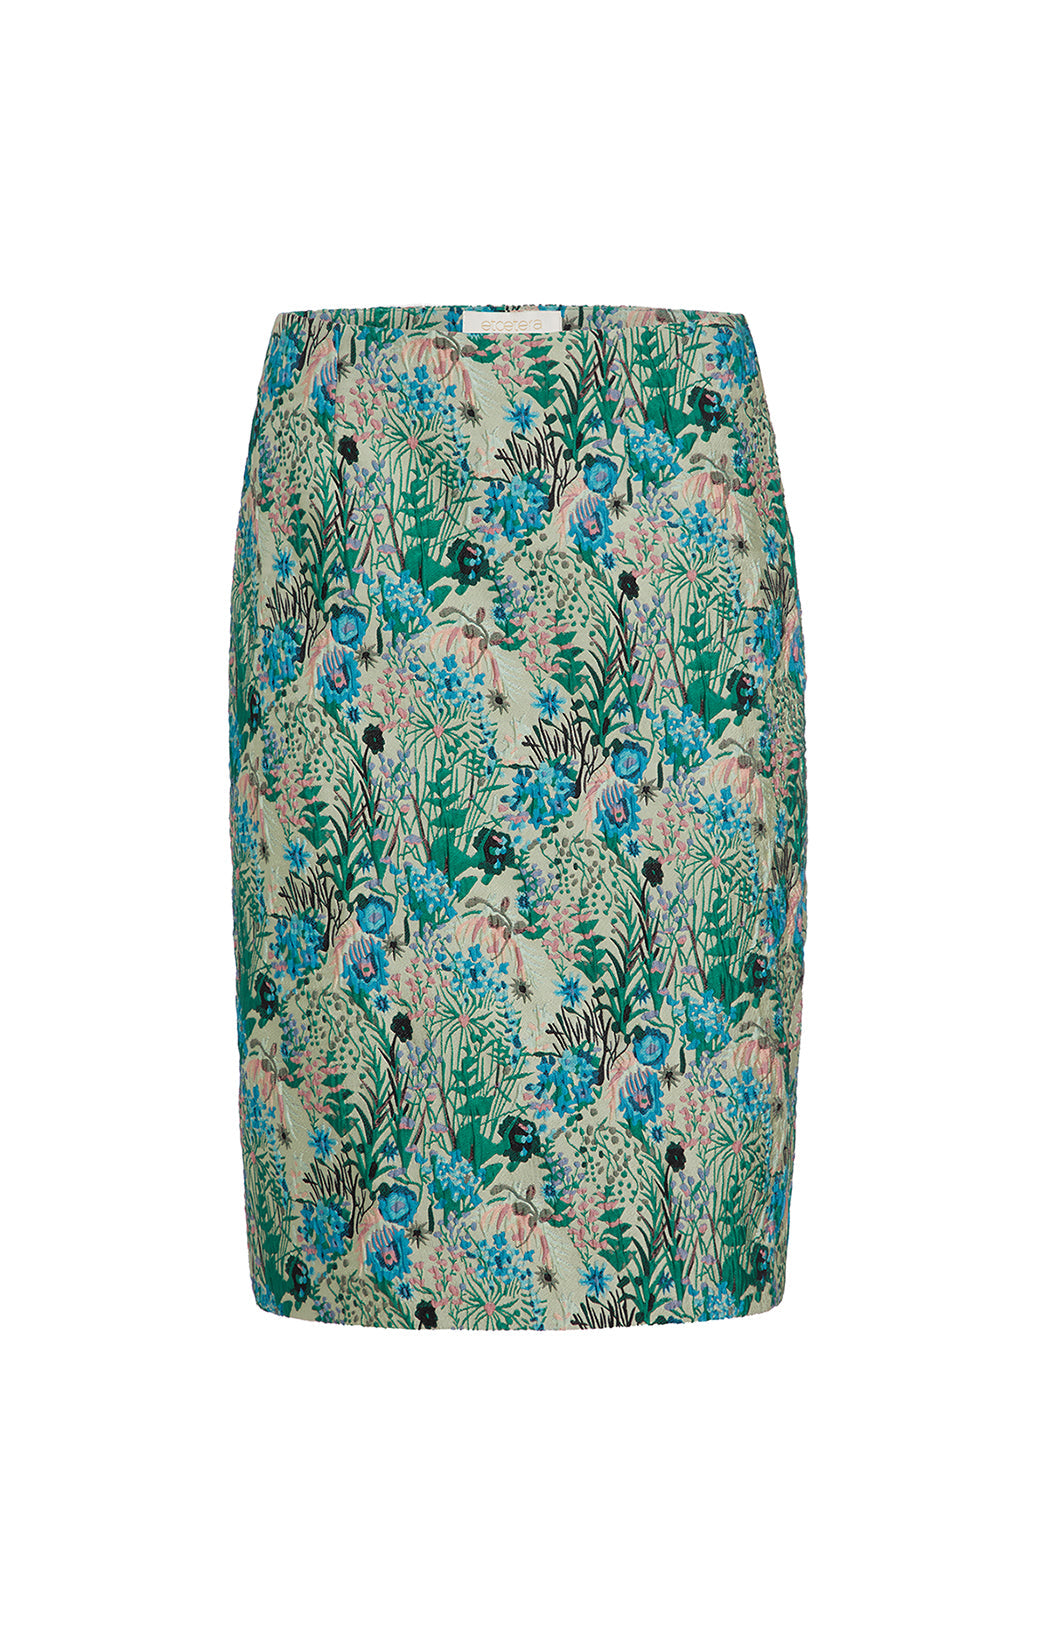 Folkloric - Flower-Embroidered Evening Skirt - Product Image